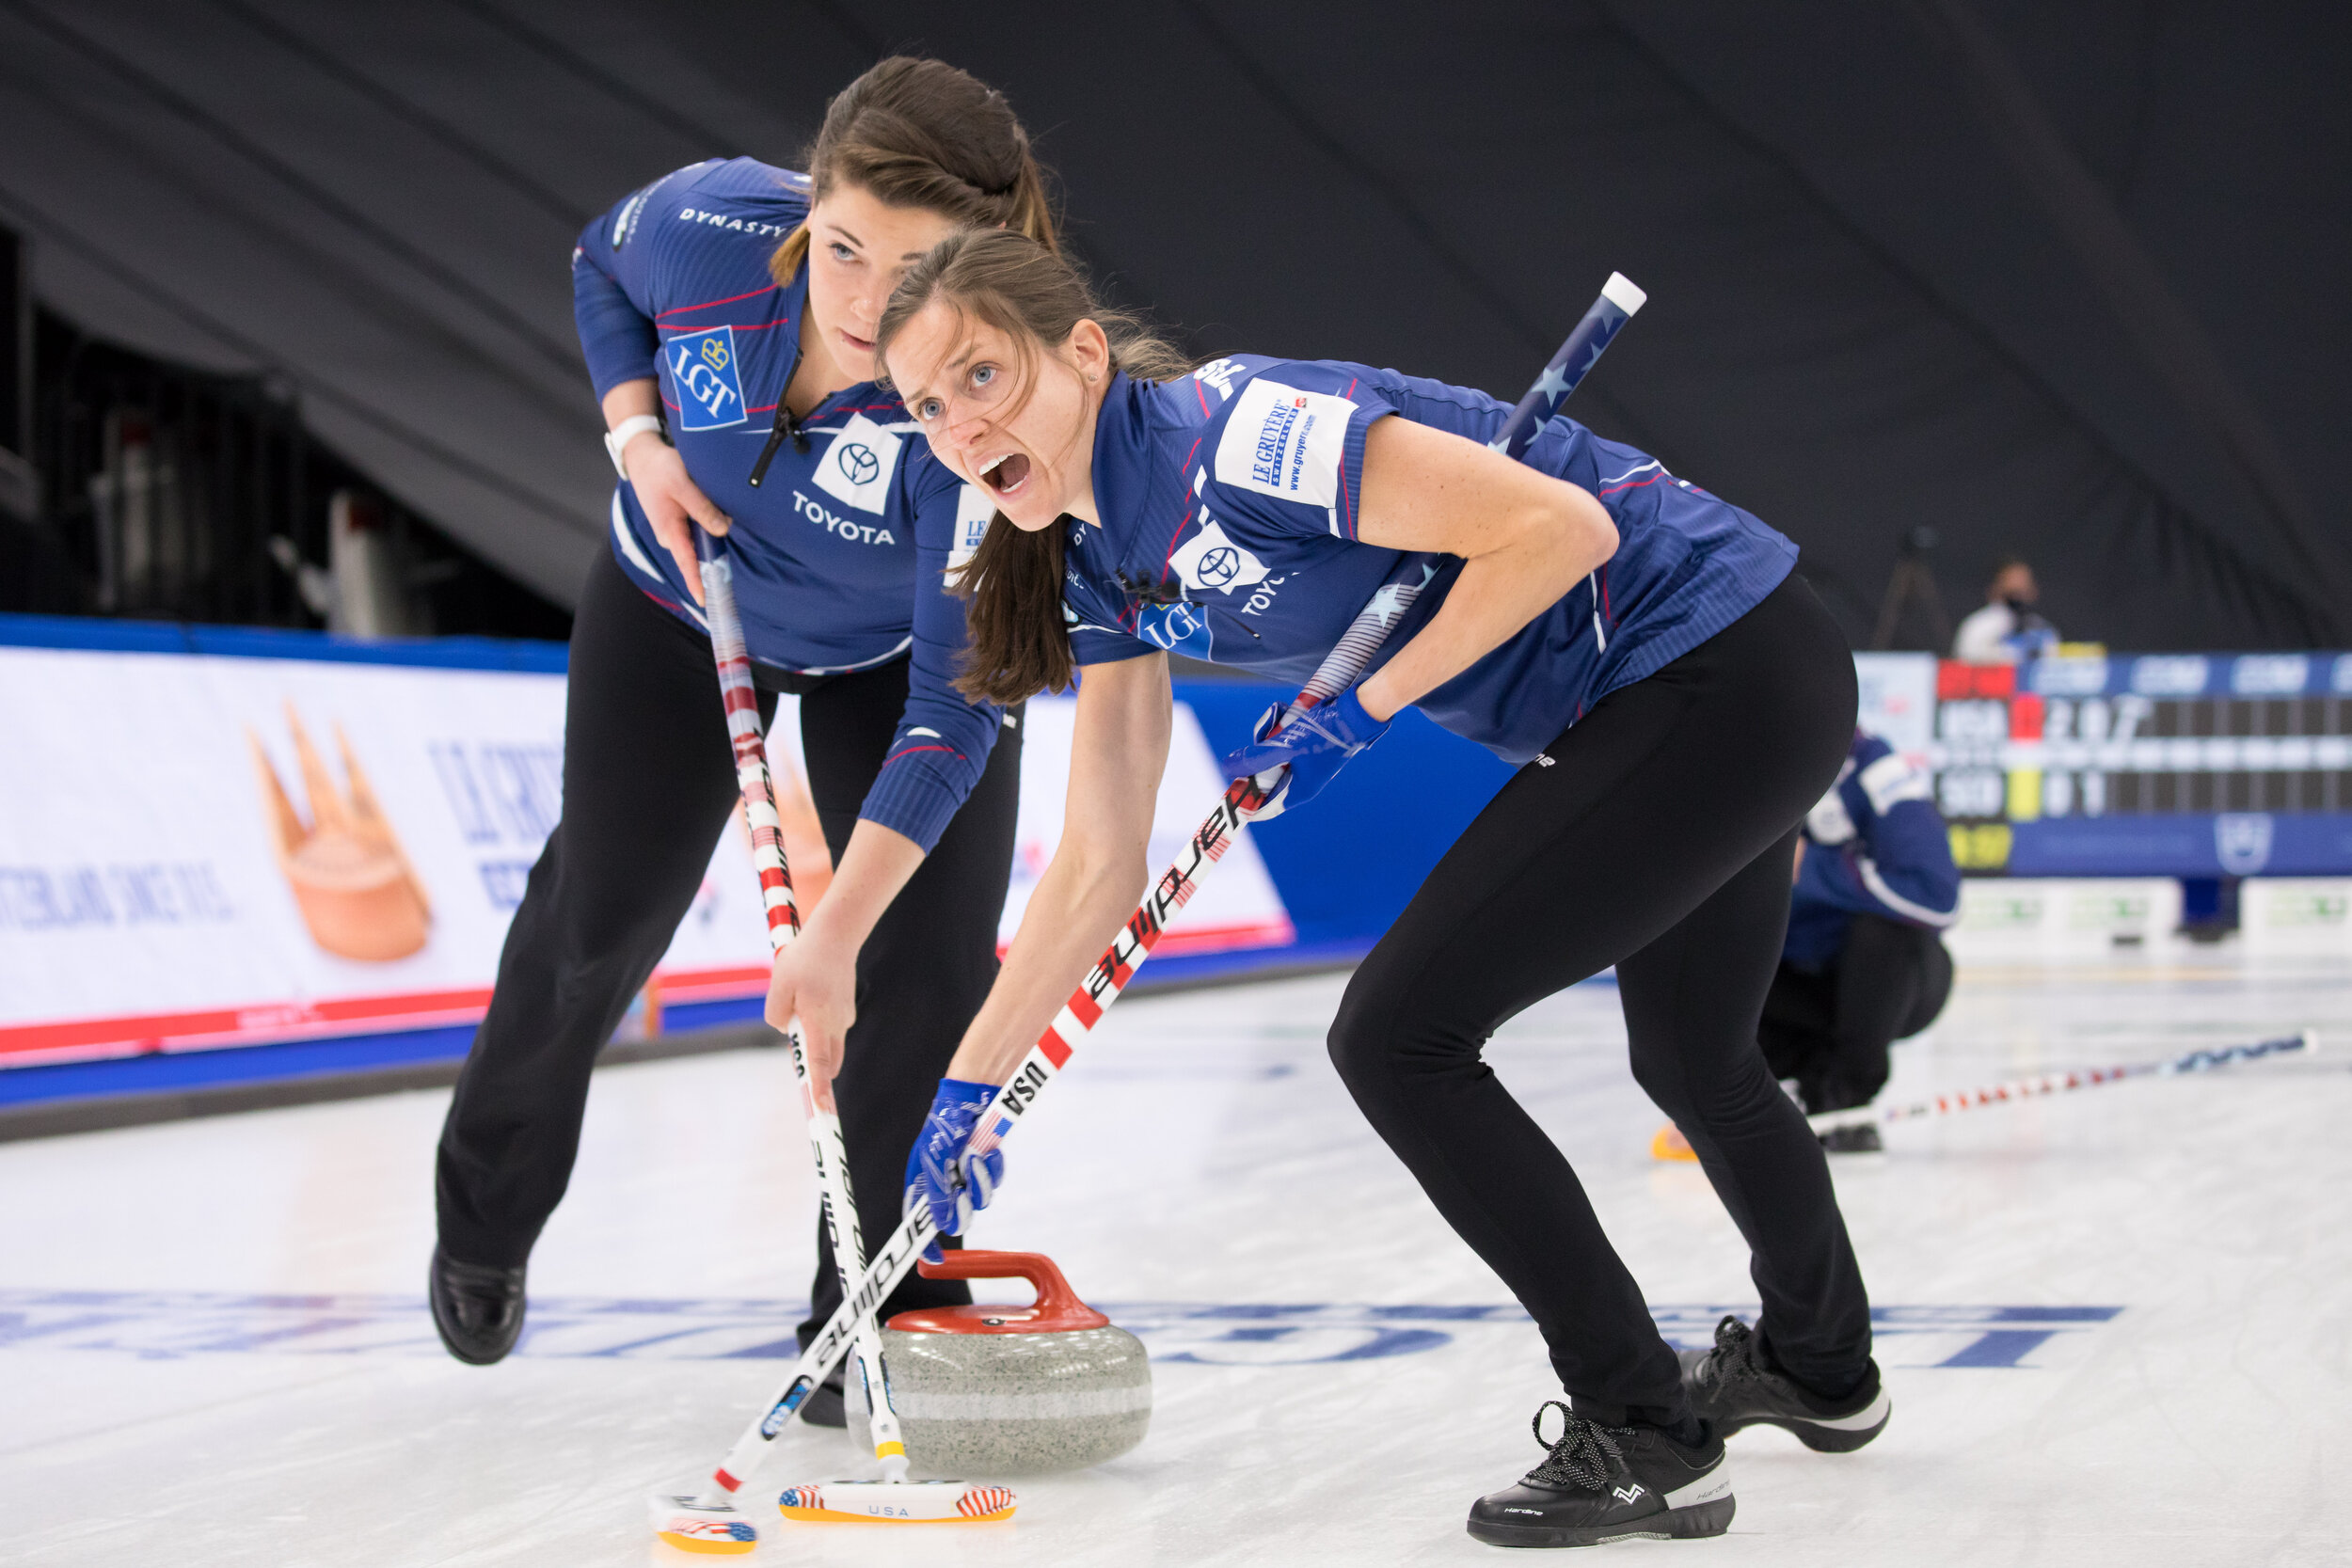 Team Usa In Playoff Contention At World Women S Curling Championship Usa Curling